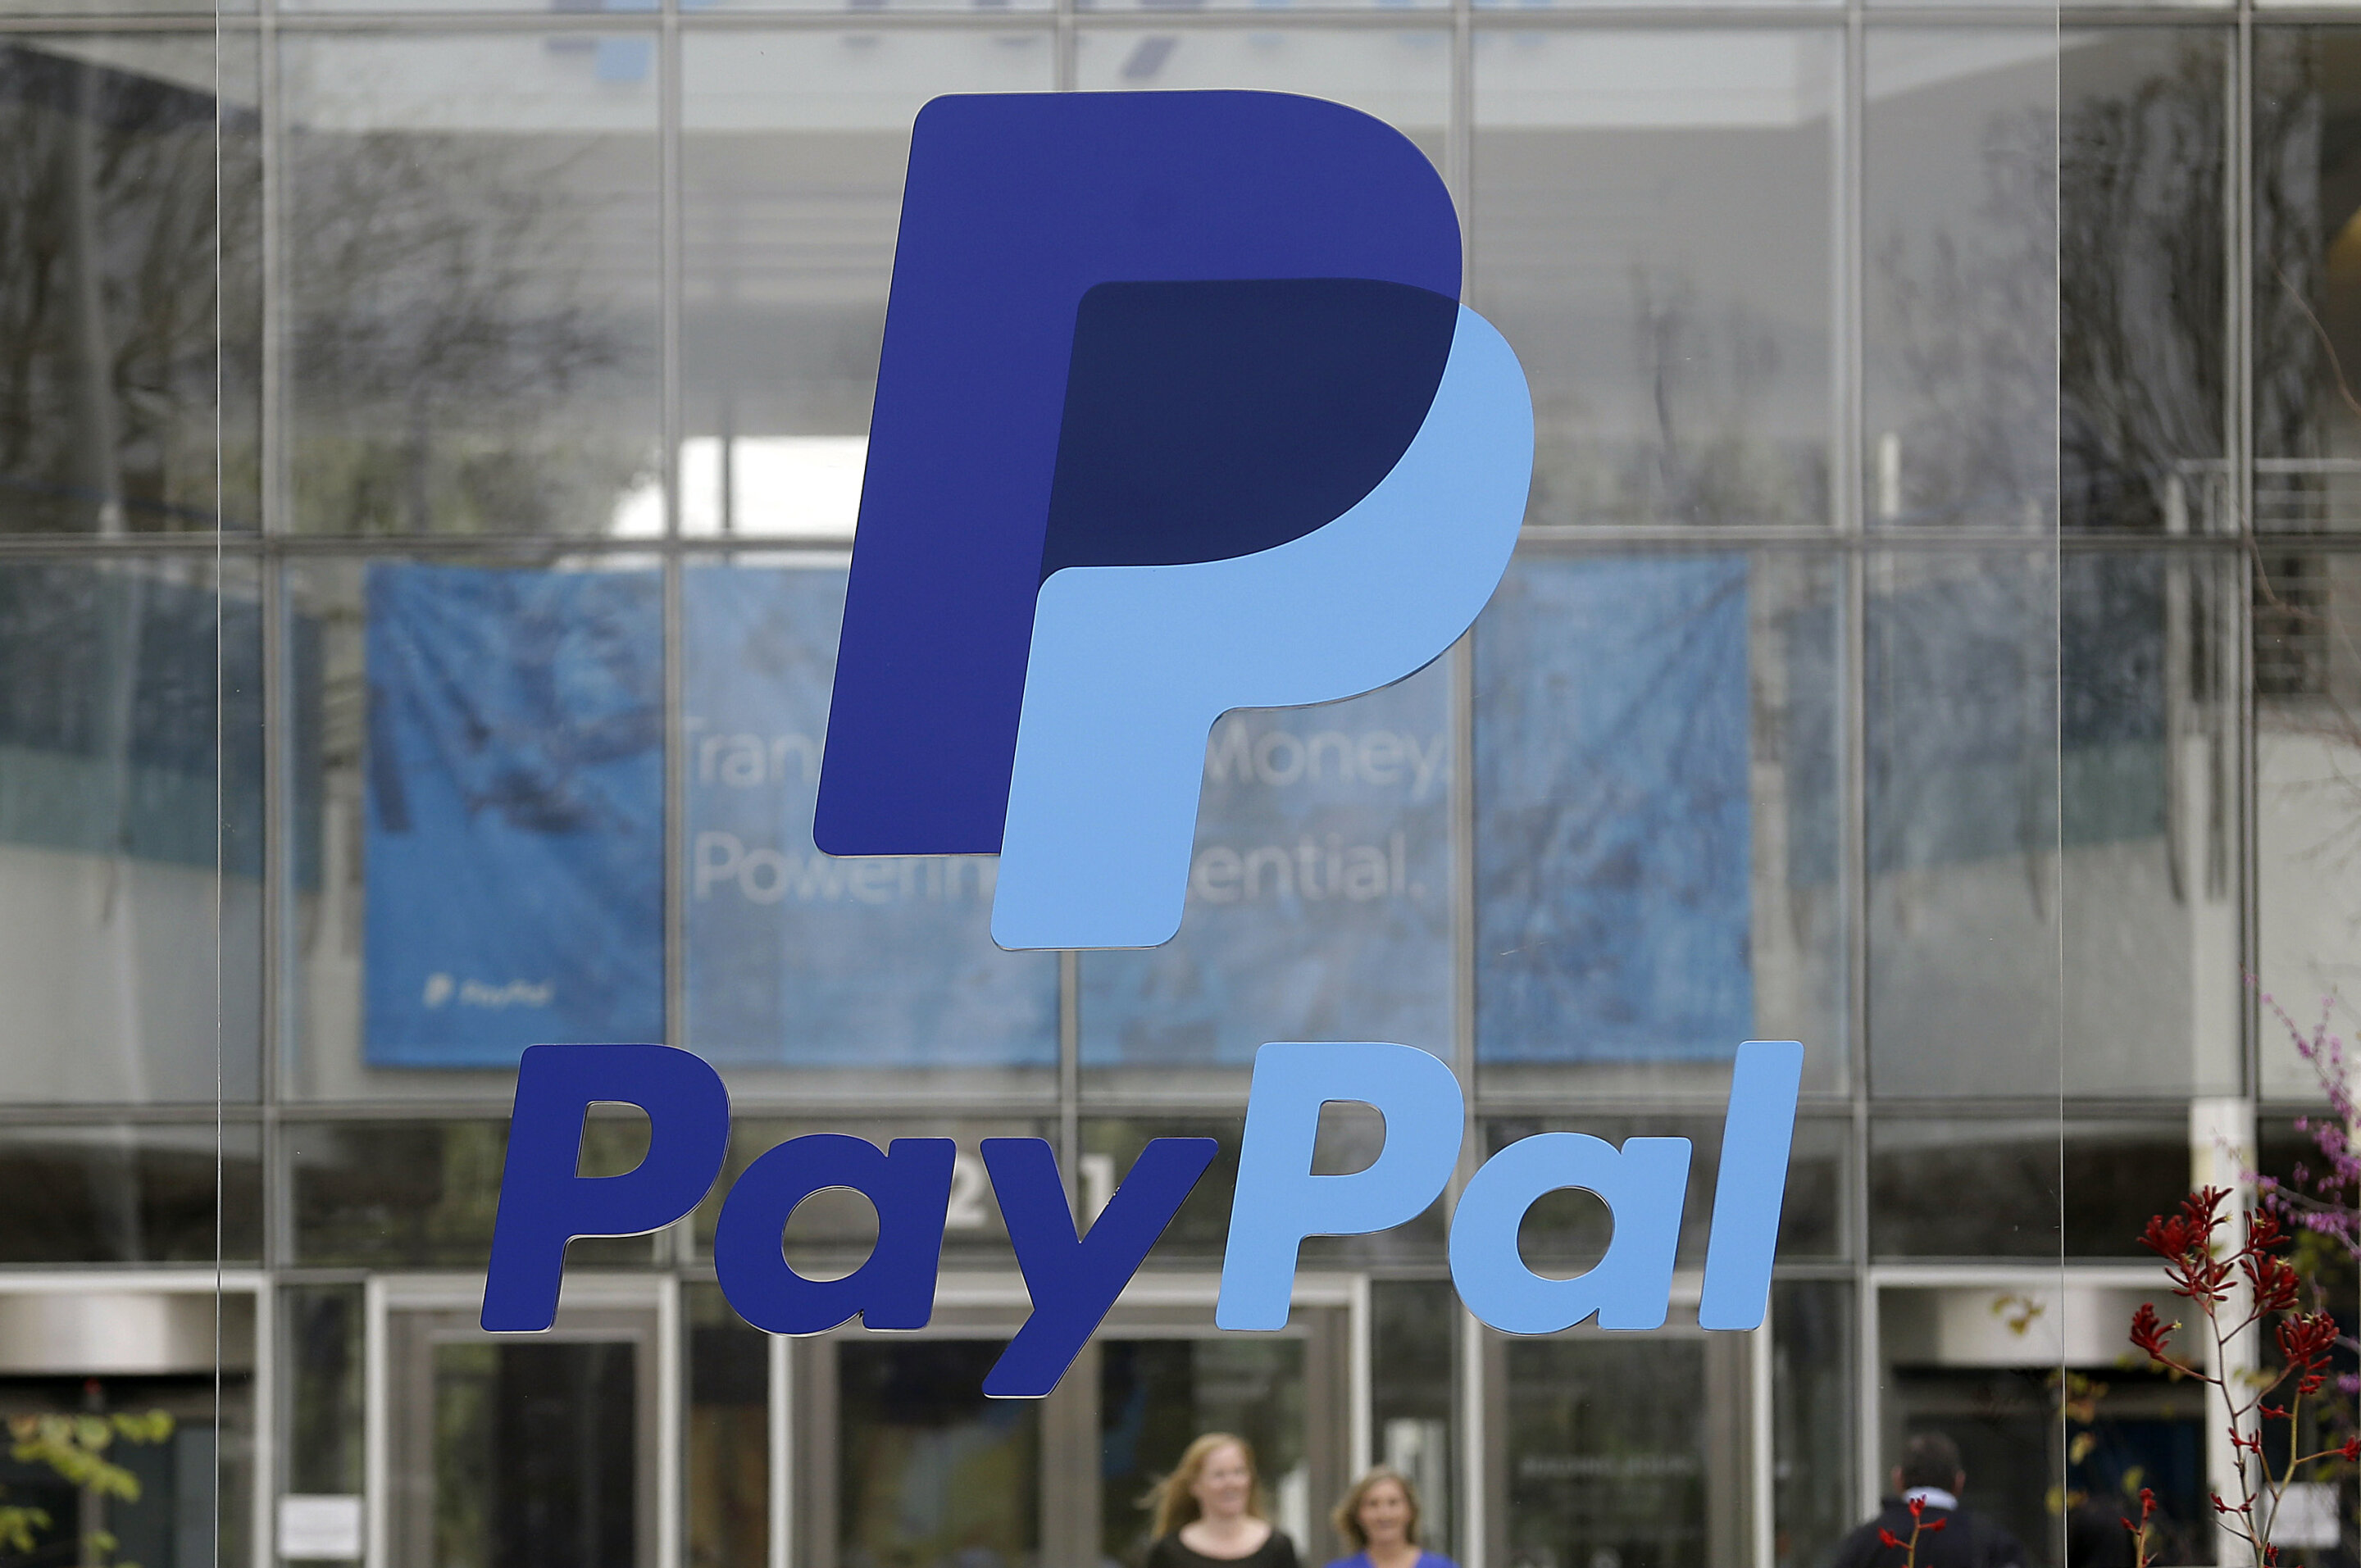 #PayPal to cut 2,000 jobs in latest tech company cost-cutting